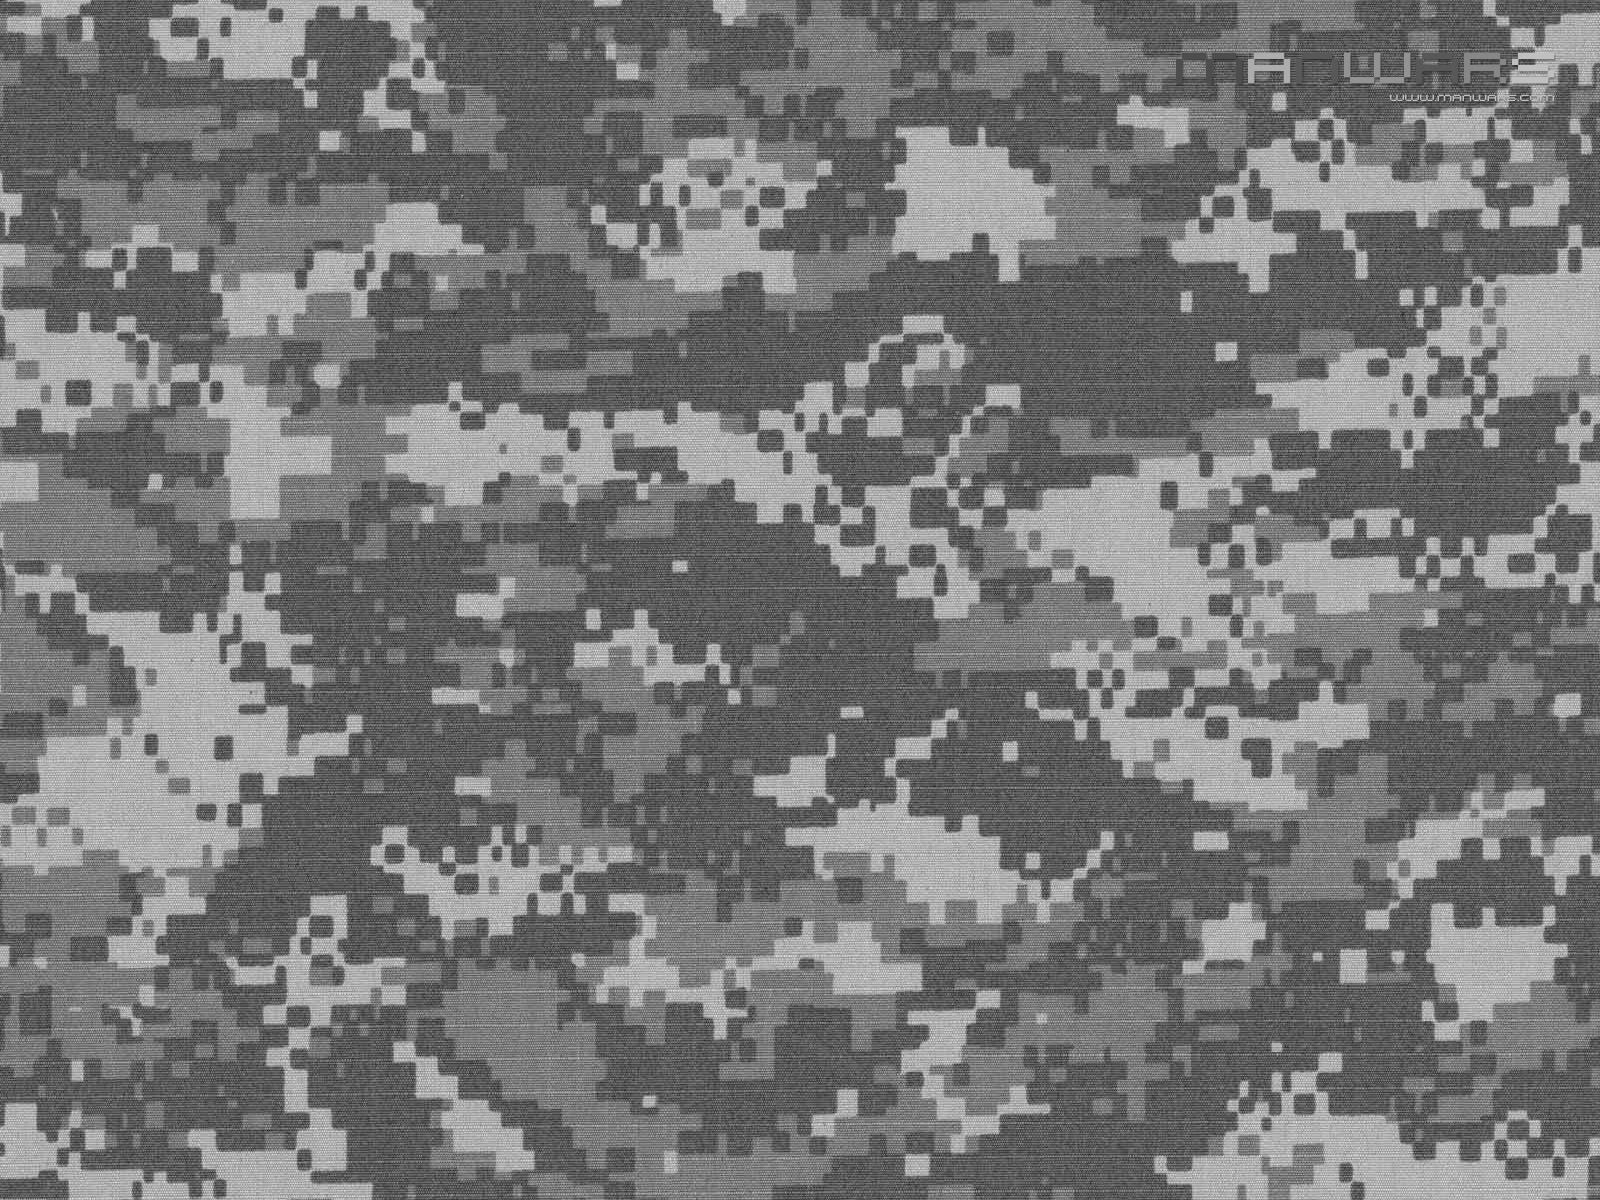 Camouflage Wallpaper 1600x1200 Camouflage